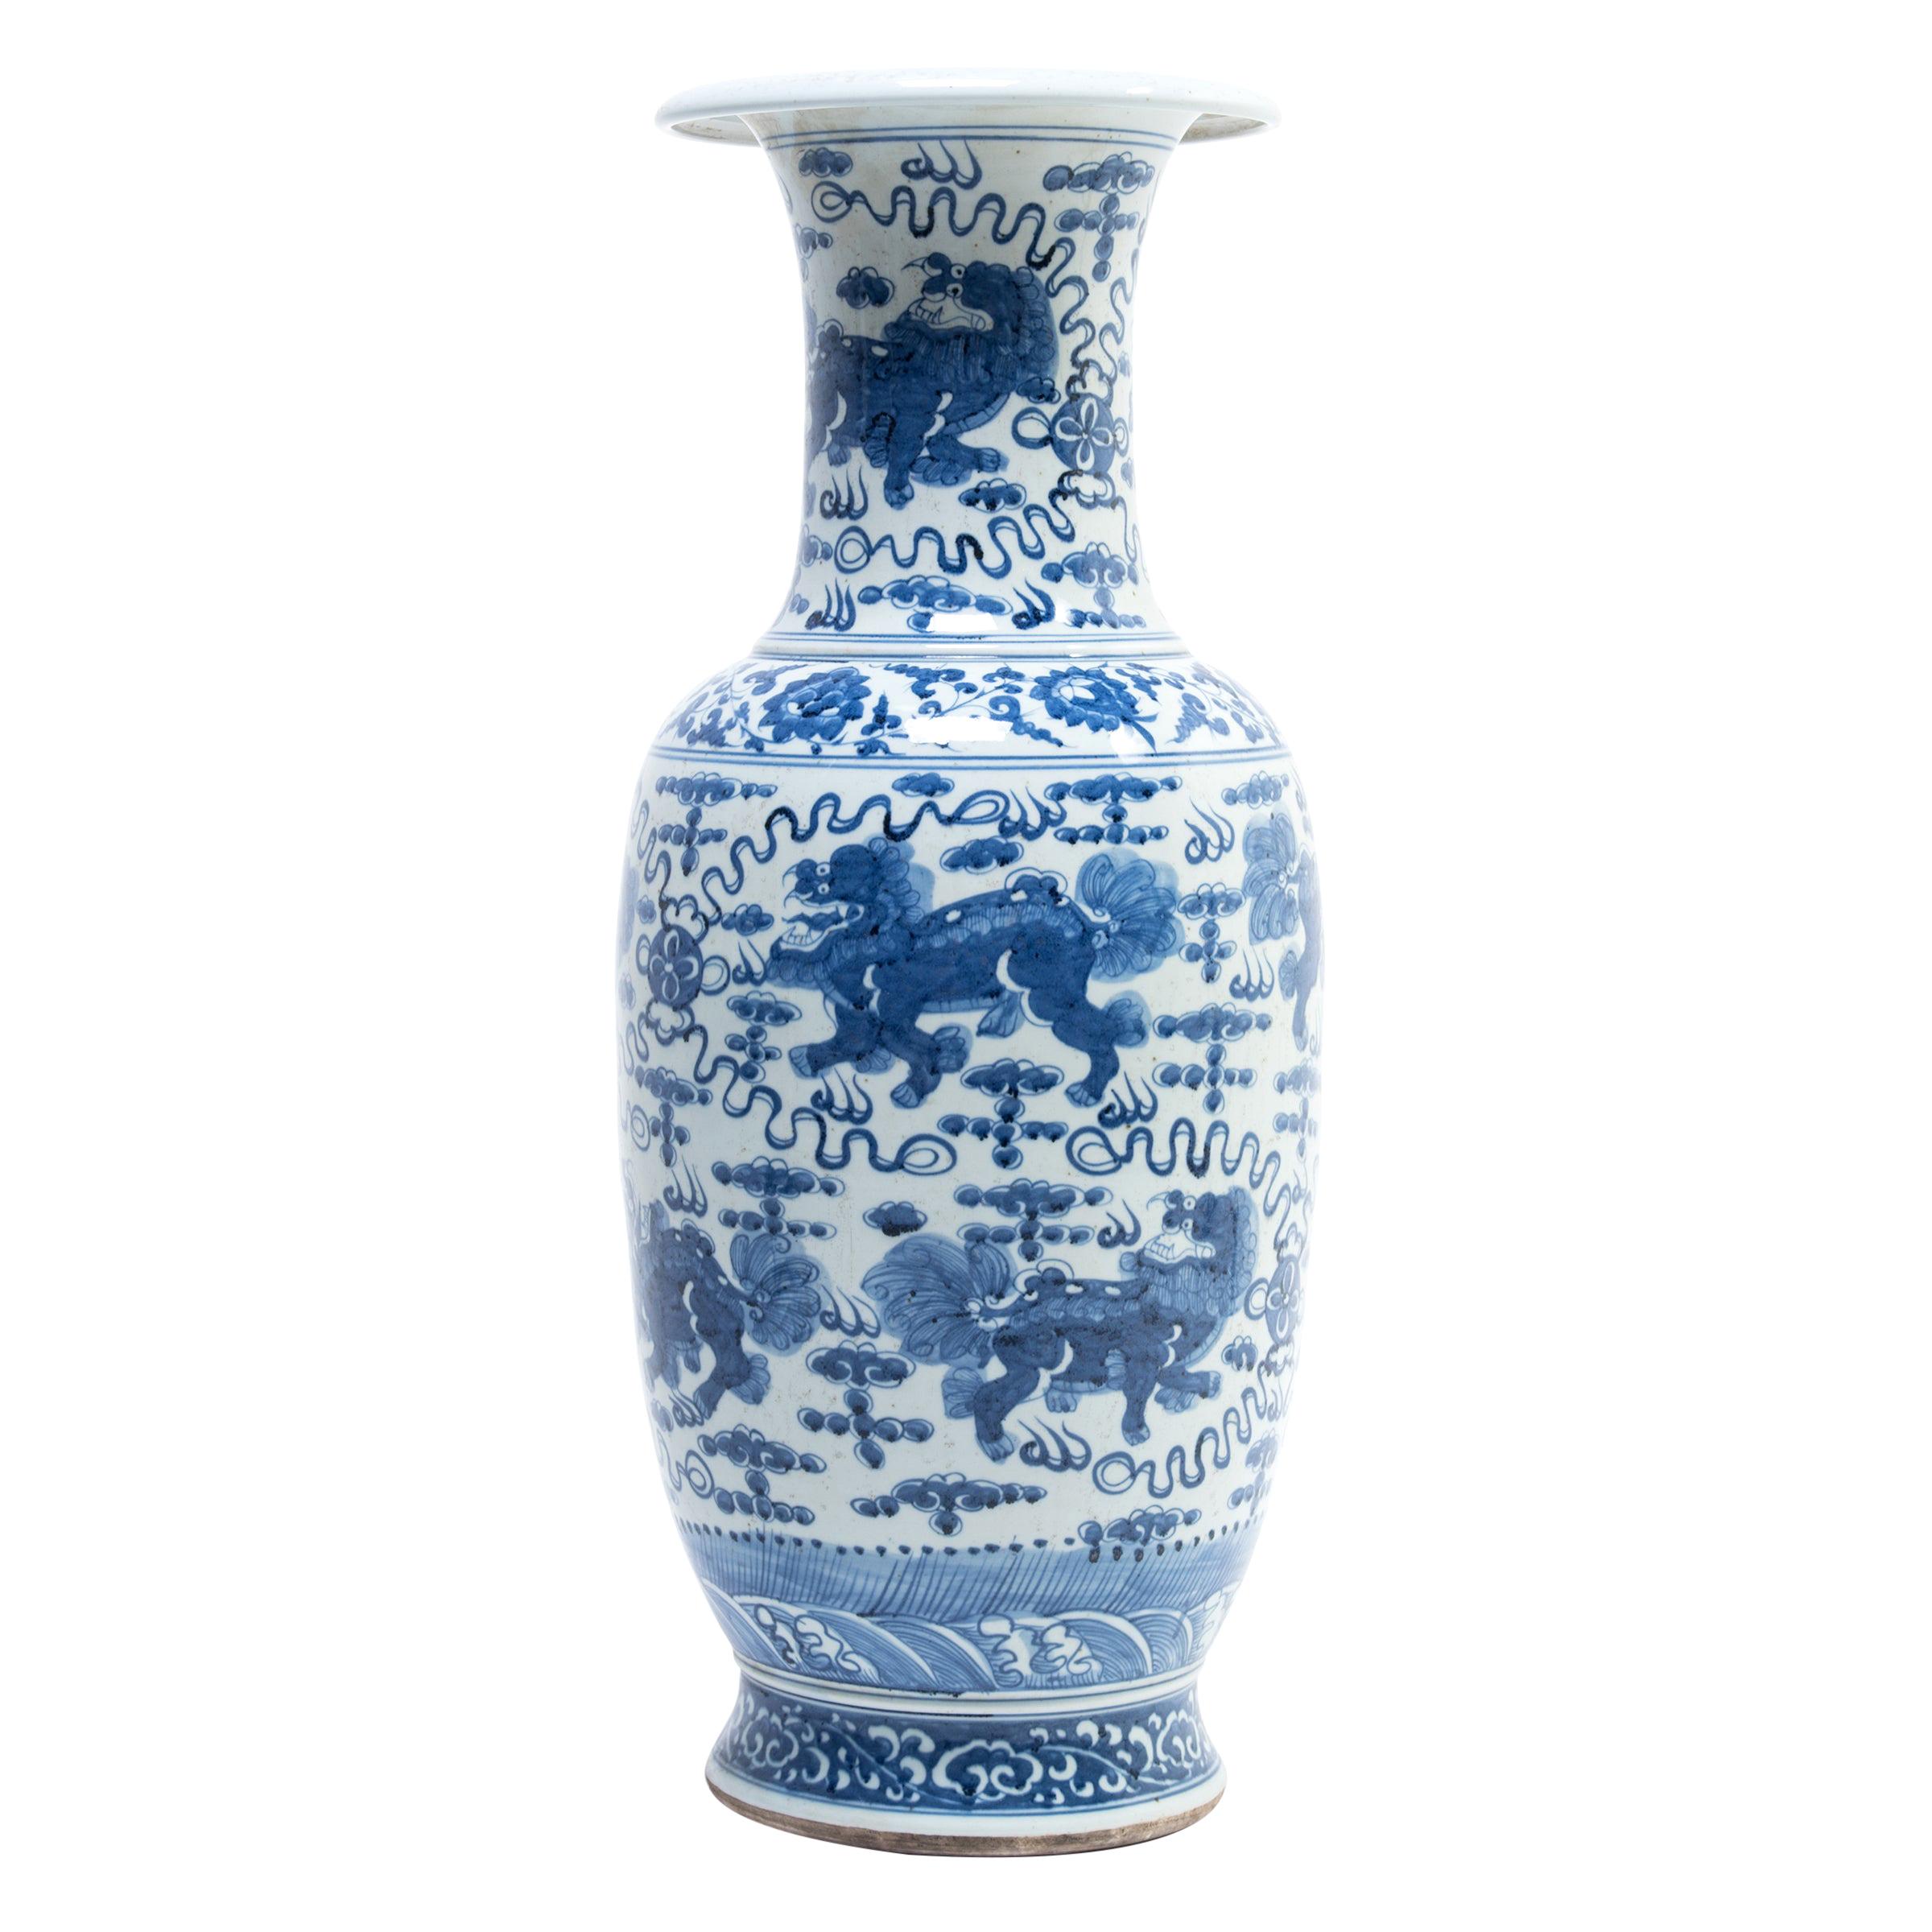 Tall Chinese Blue and White Qilin Fantail Vase